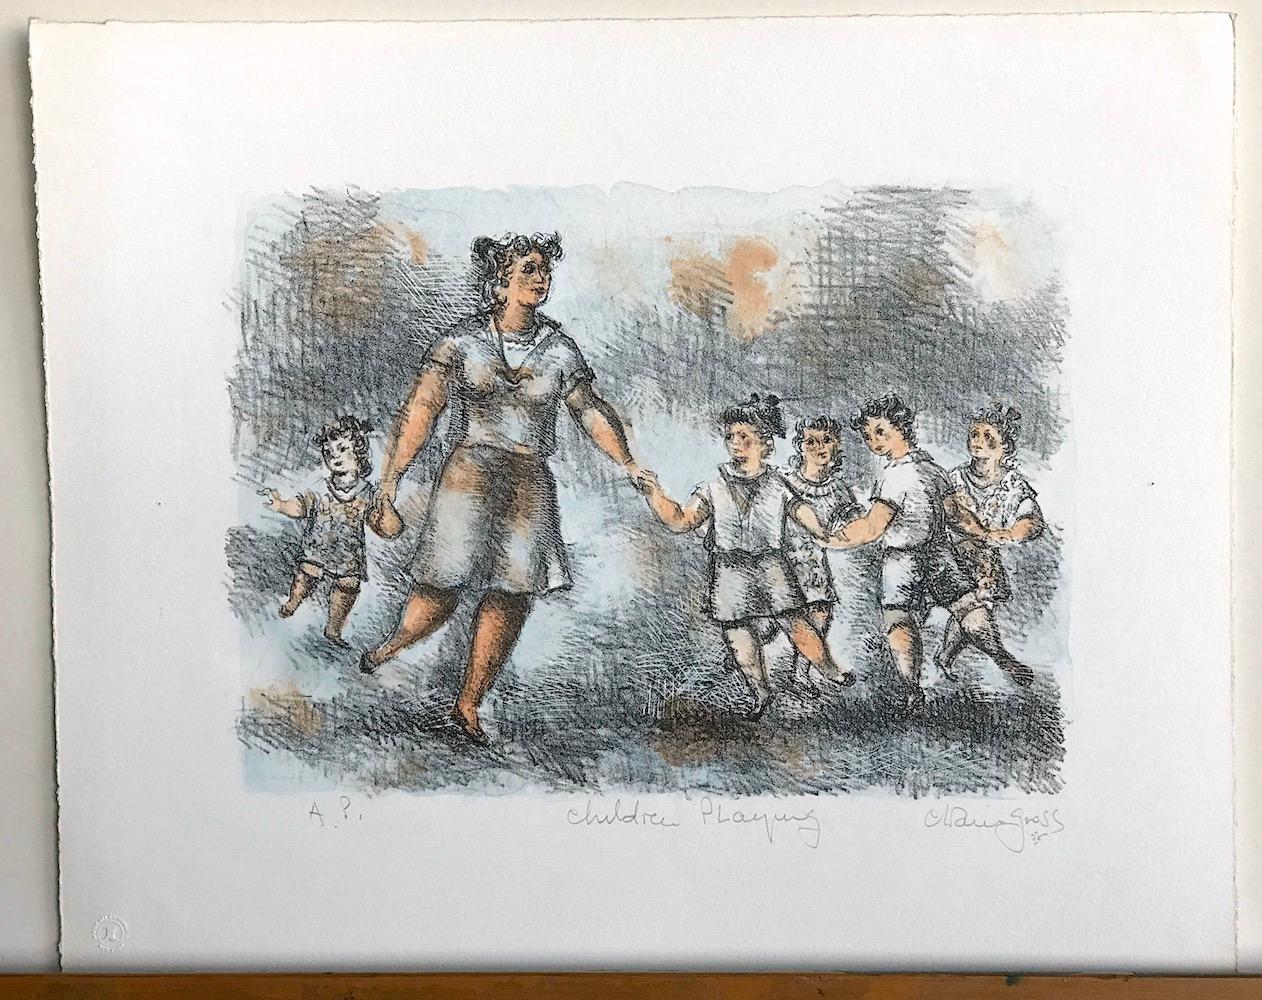 CHILDREN PLAYING, is an original hand drawn, stone lithograph by the American artist/sculptor Chaim Gross. CHILDREN PLAYING is a sensitive figurative composition depicting a woman with a group of young children playing together. CHILDREN PLAYING was